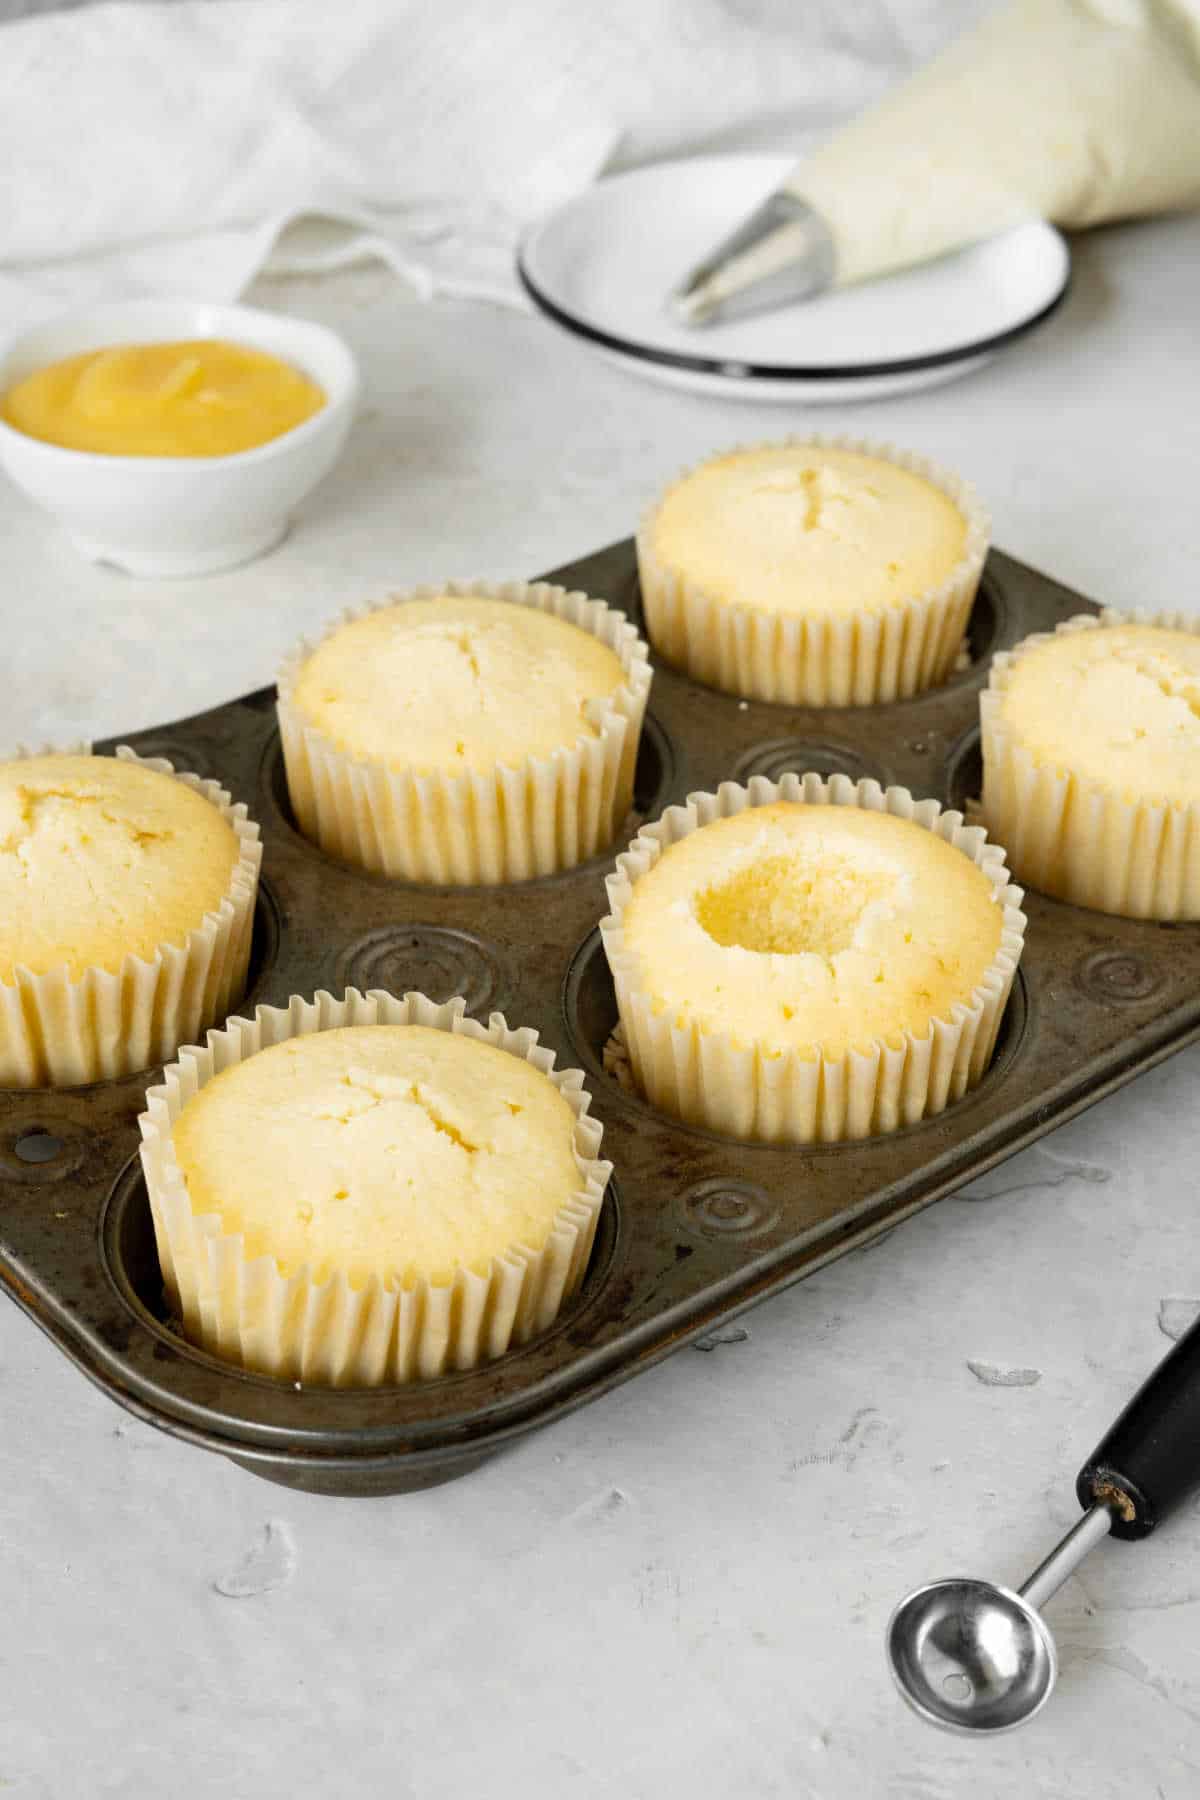 Metal muffin pan with lemon cupcakes, a melon baller, bowl with lemon curd, piping bag. Grey and white surface.